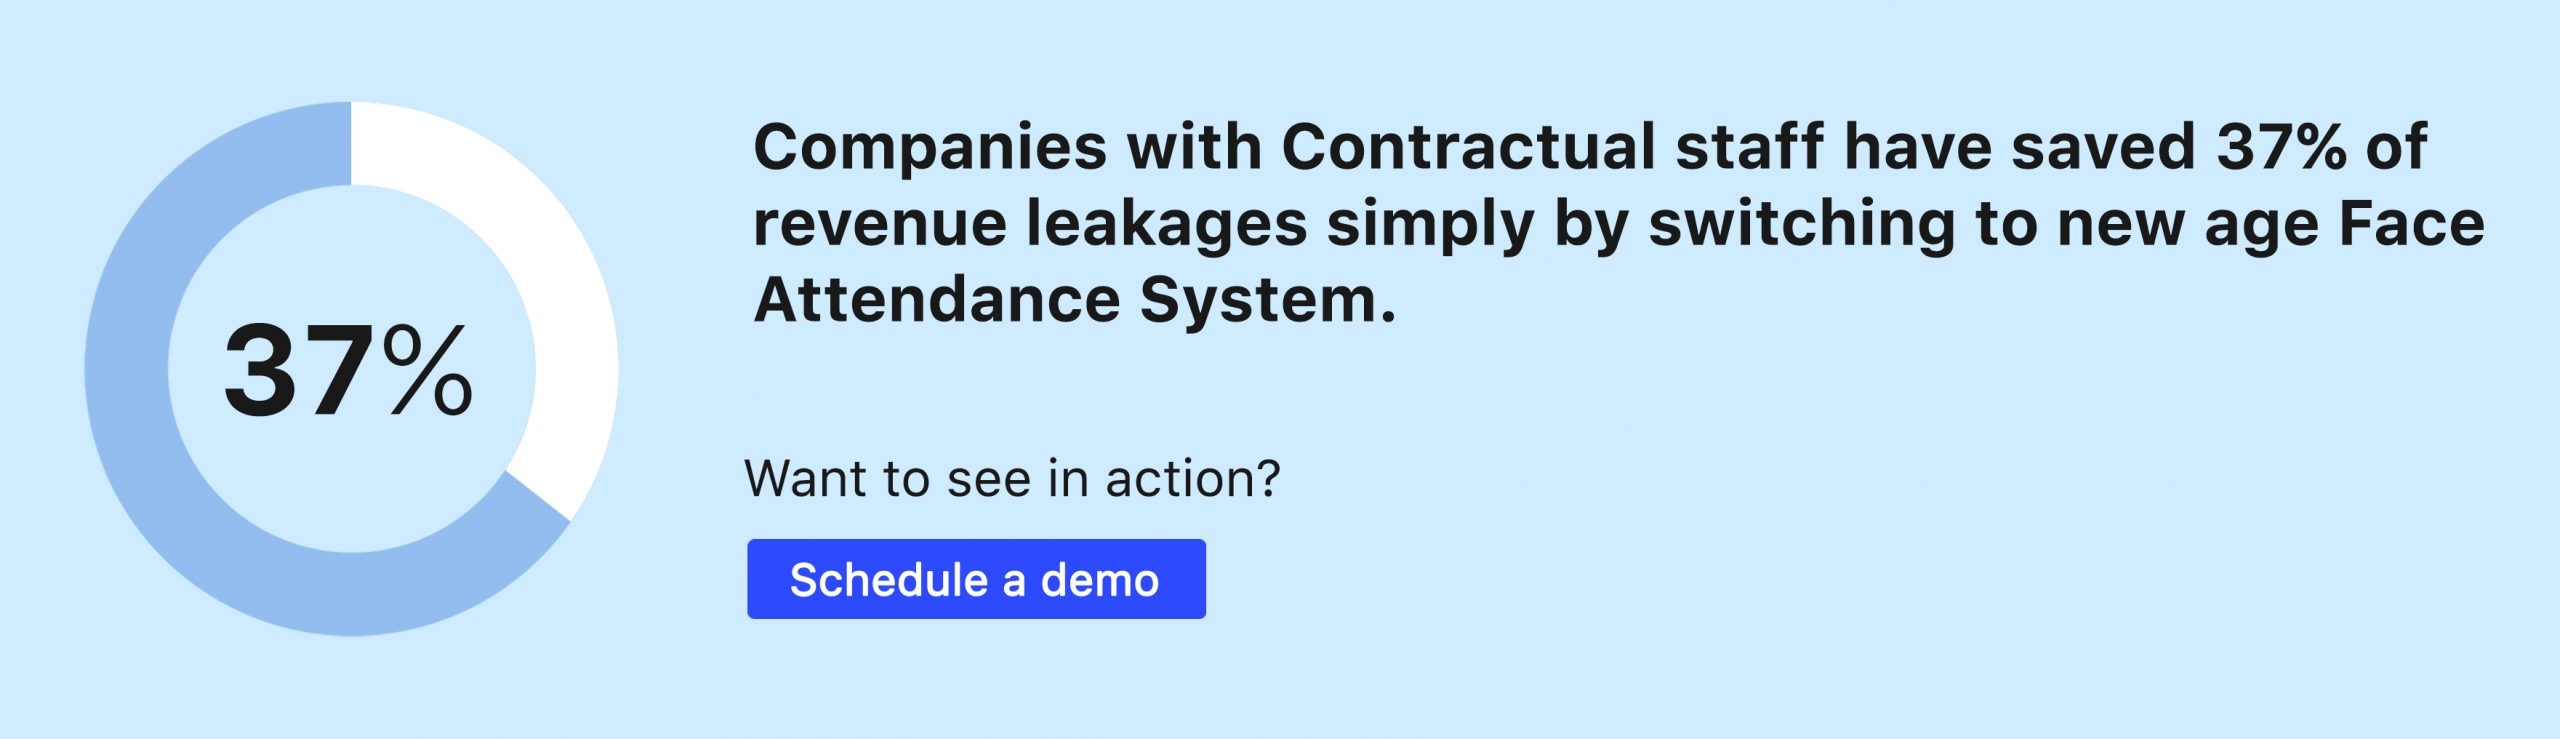 Companies with contractual staff saved 37% revenue leakage by switching to face recognition attendance system